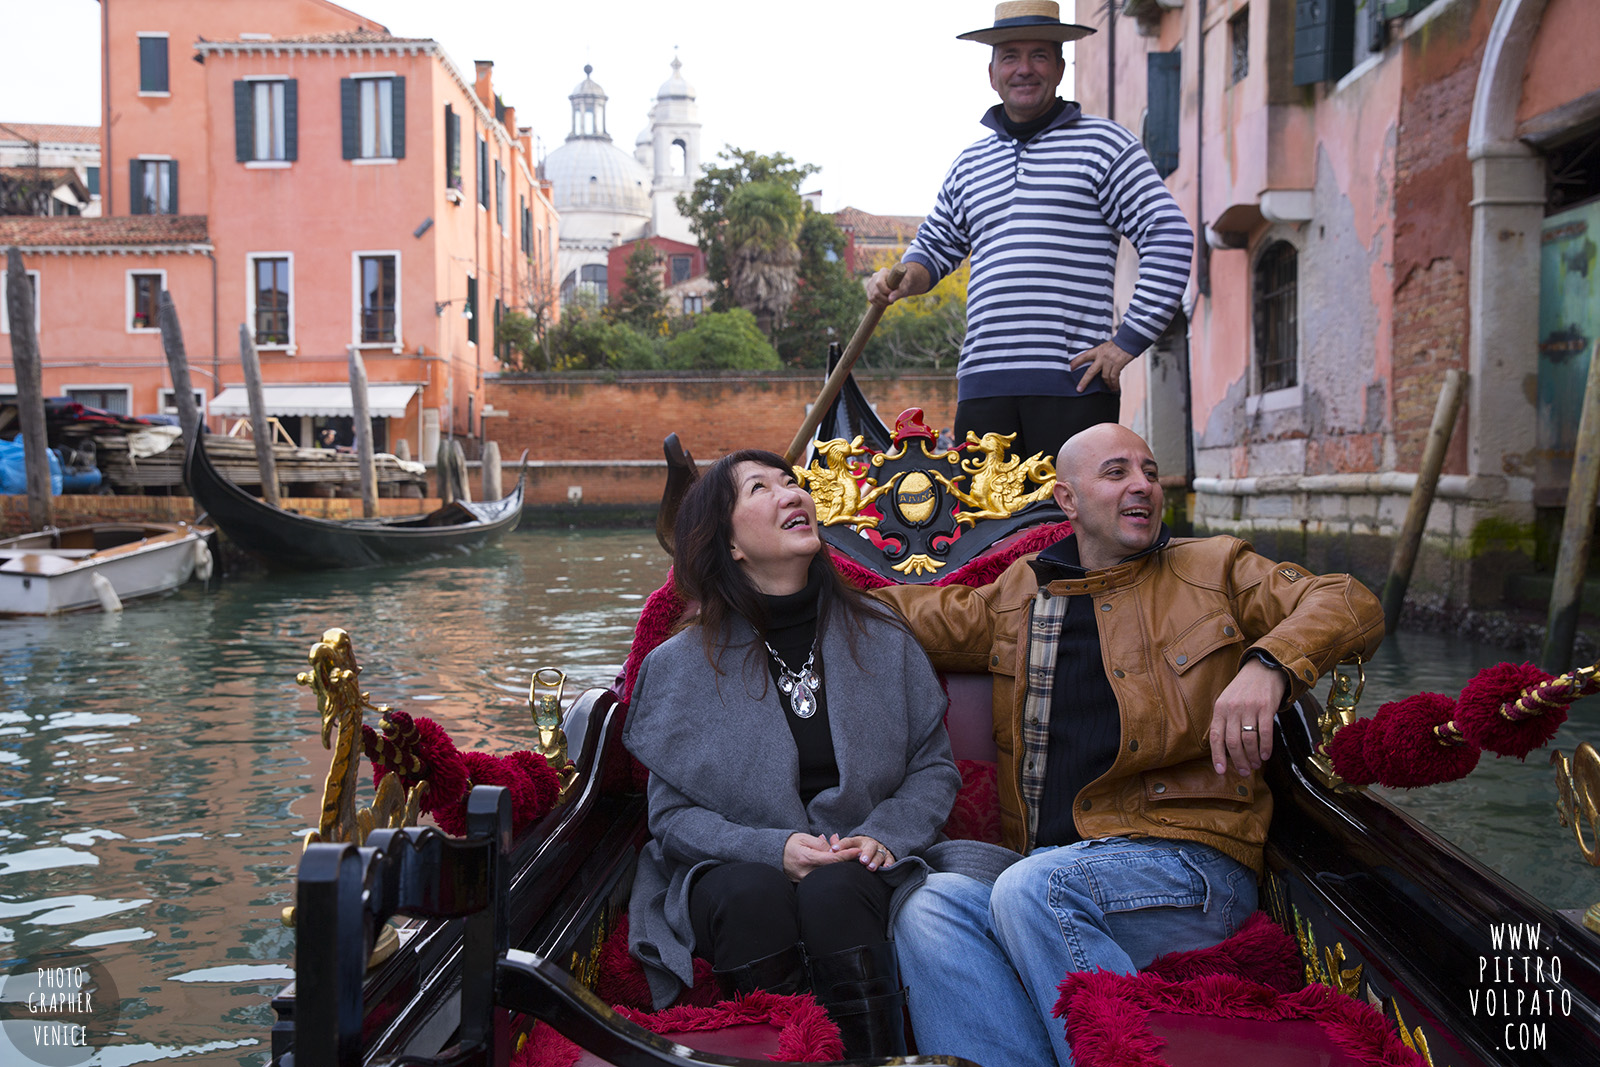 photographer in venice for photoshoot of couple wedding anniversary pictures